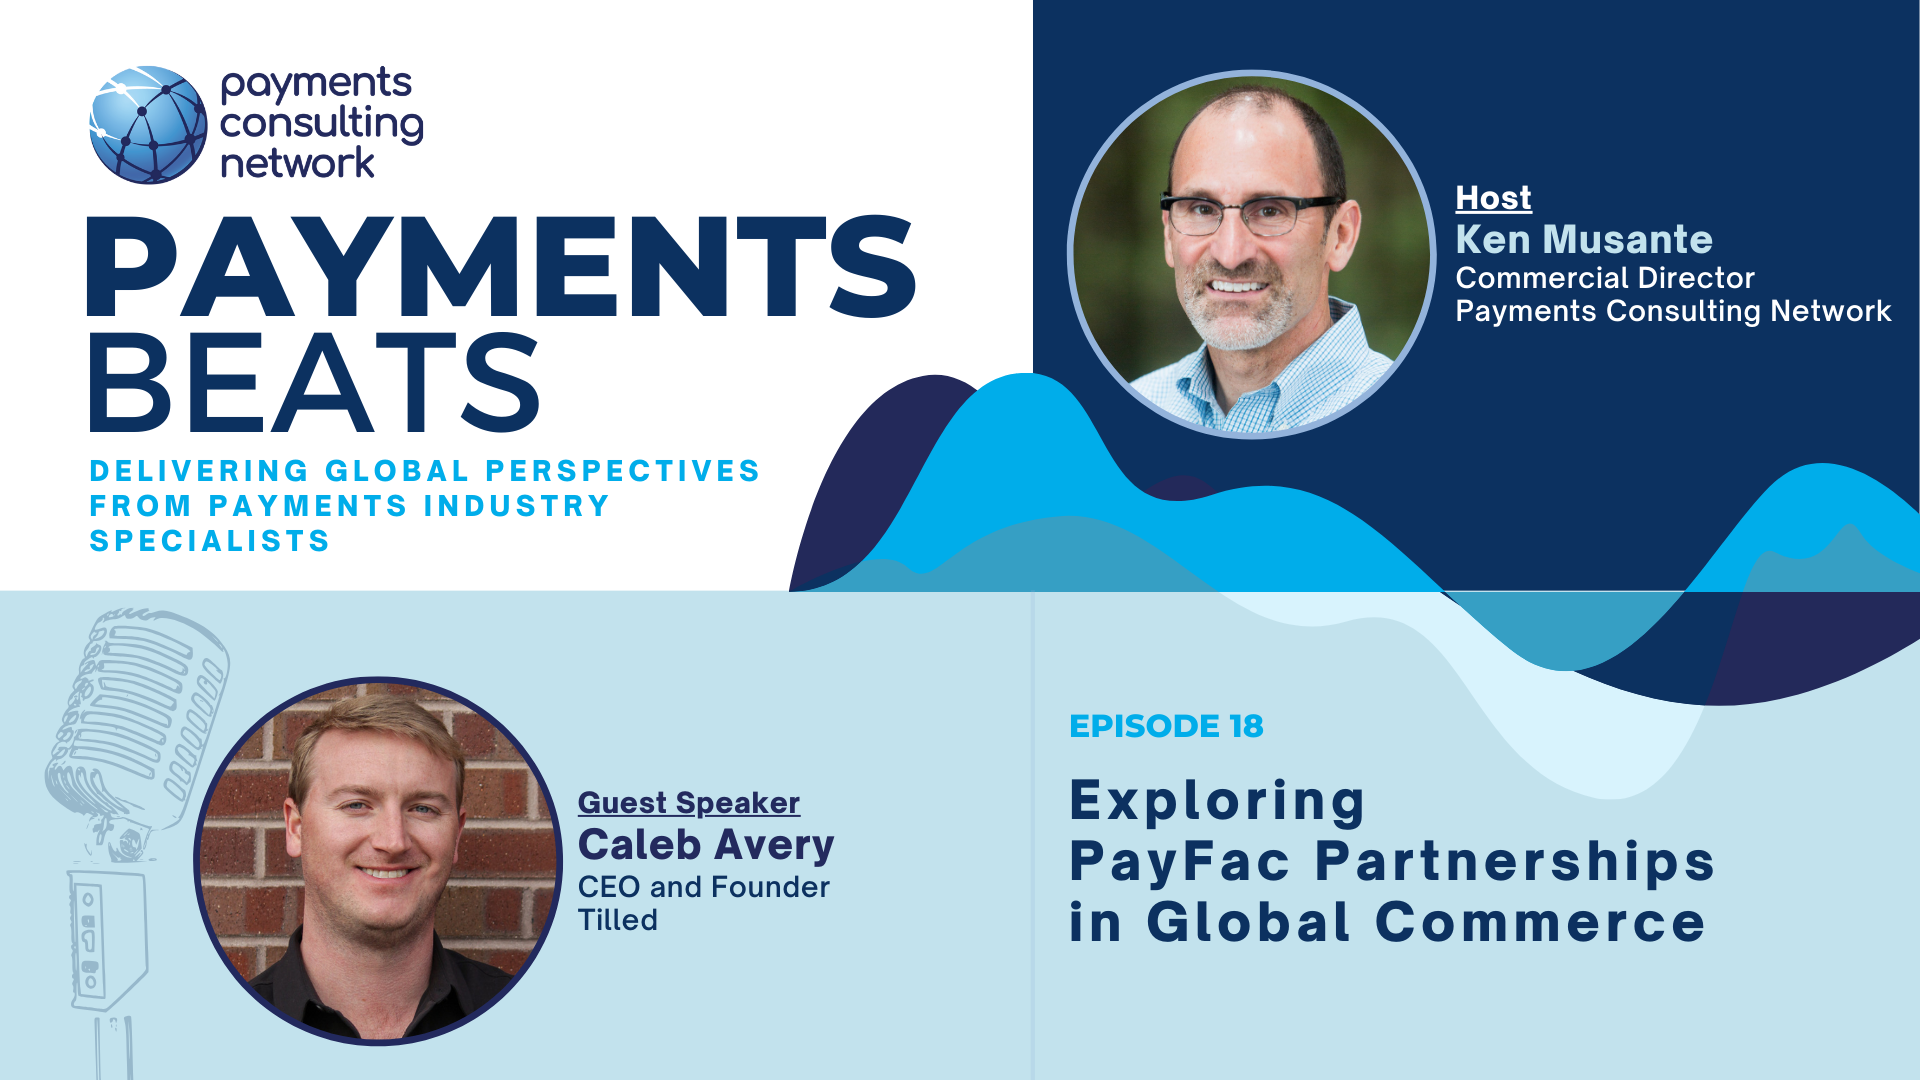 Episode 18 Exploring PayFac Partnerships in Global Commerce